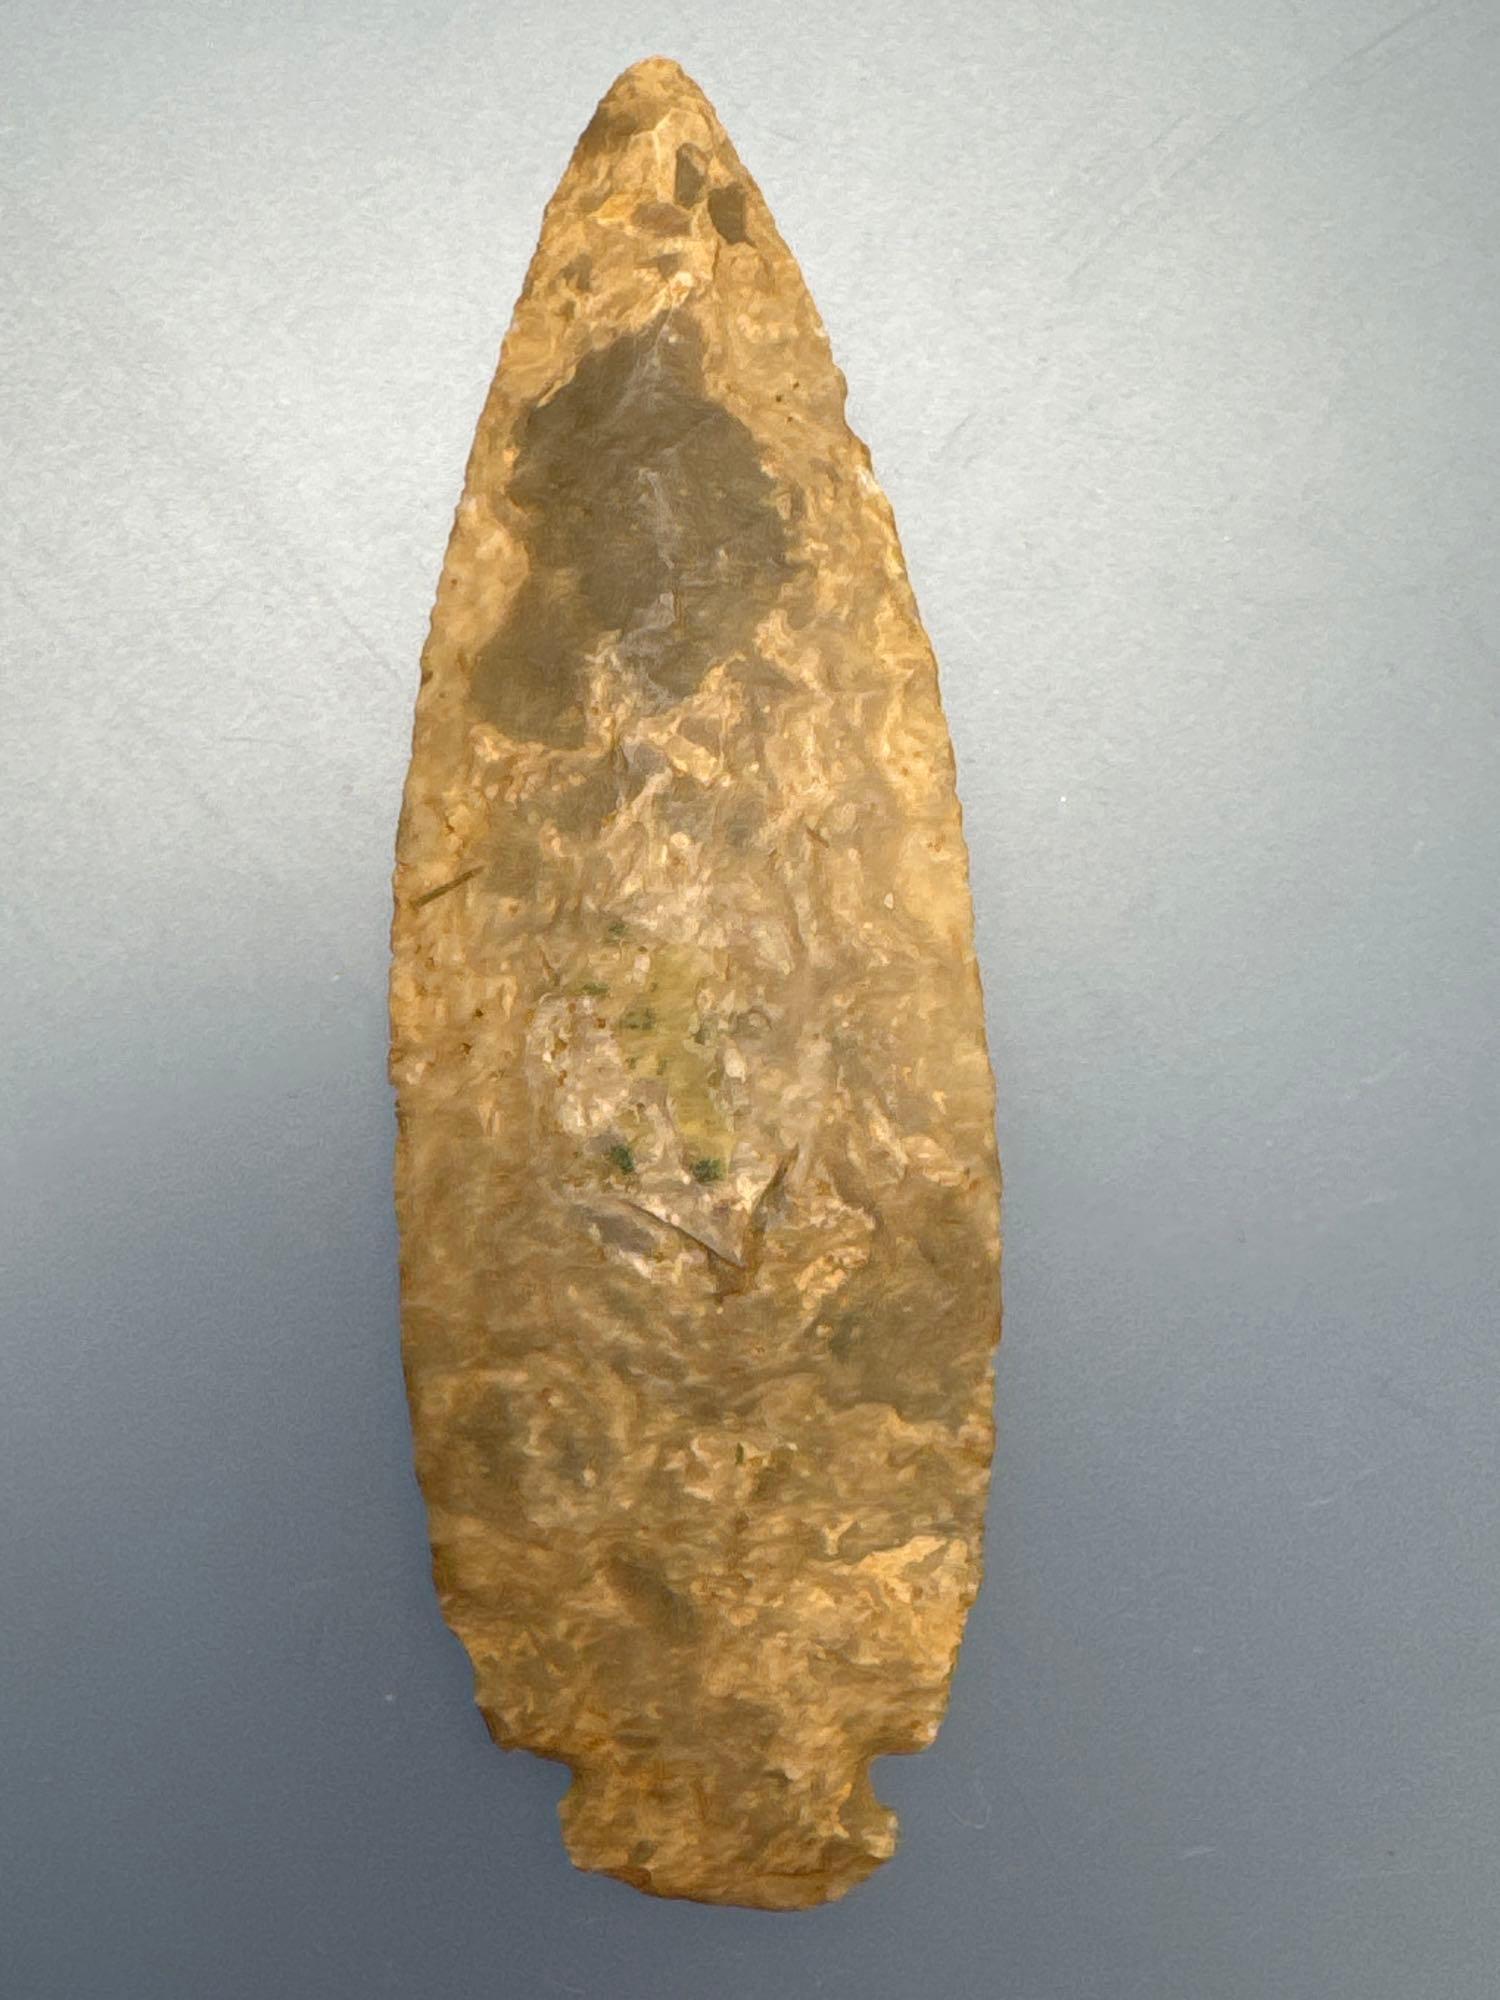 RARE 3 3/8" Patinated Onondaga Chert Dovetail Point, Found in Western, NY, Ex: Marrissey of Whitney